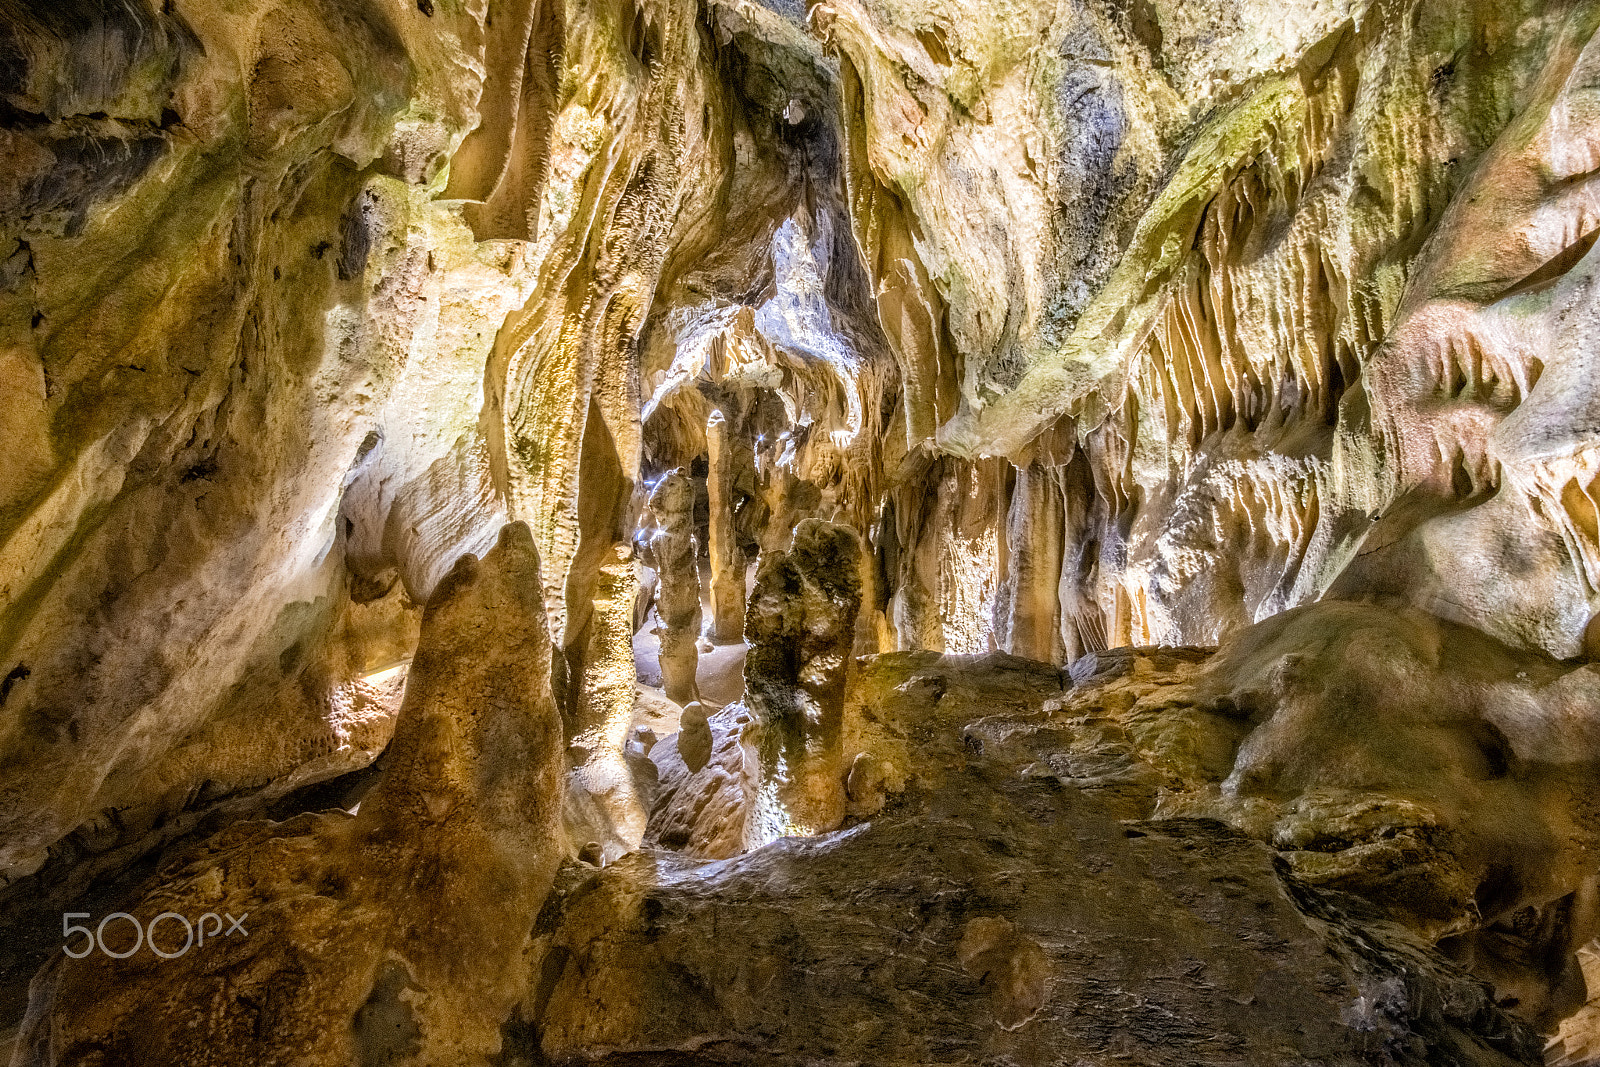 Pentax K-S2 sample photo. Impression from the stalactite cave no. 8 - the chaotic scene photography